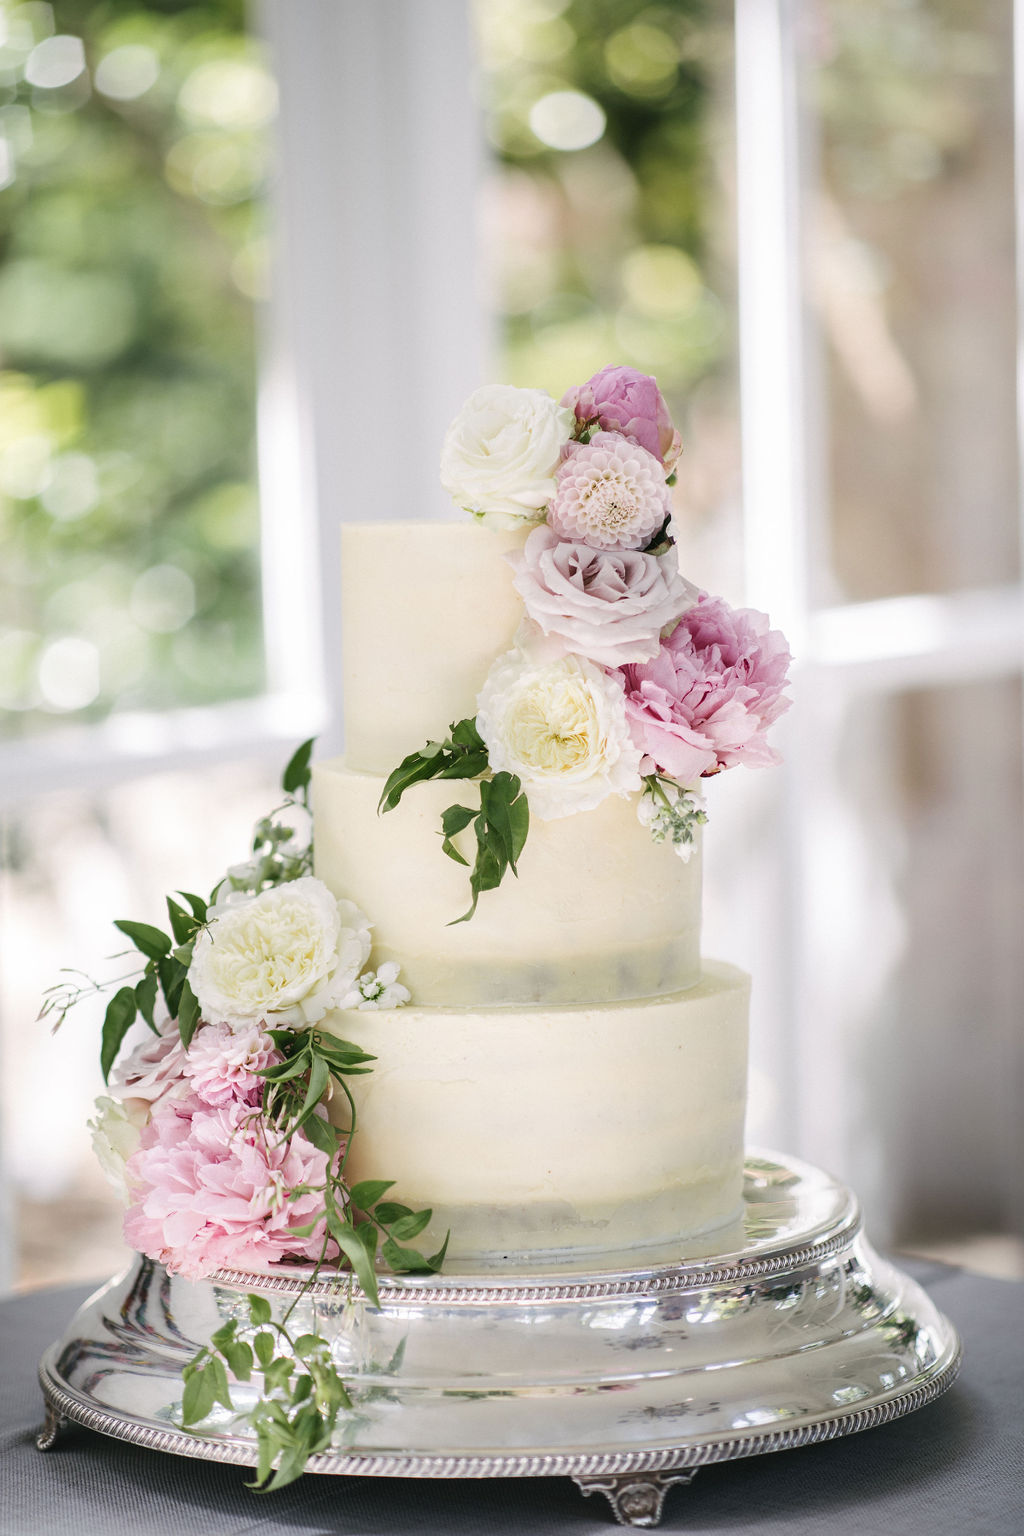 Cascade of fresh flowers in delicate pinks and ivory on this beautiful buttercream wedding cake by Sugar Plum Bakes at The Orangery. Holland Park, London. Photo by Kari Bellamy